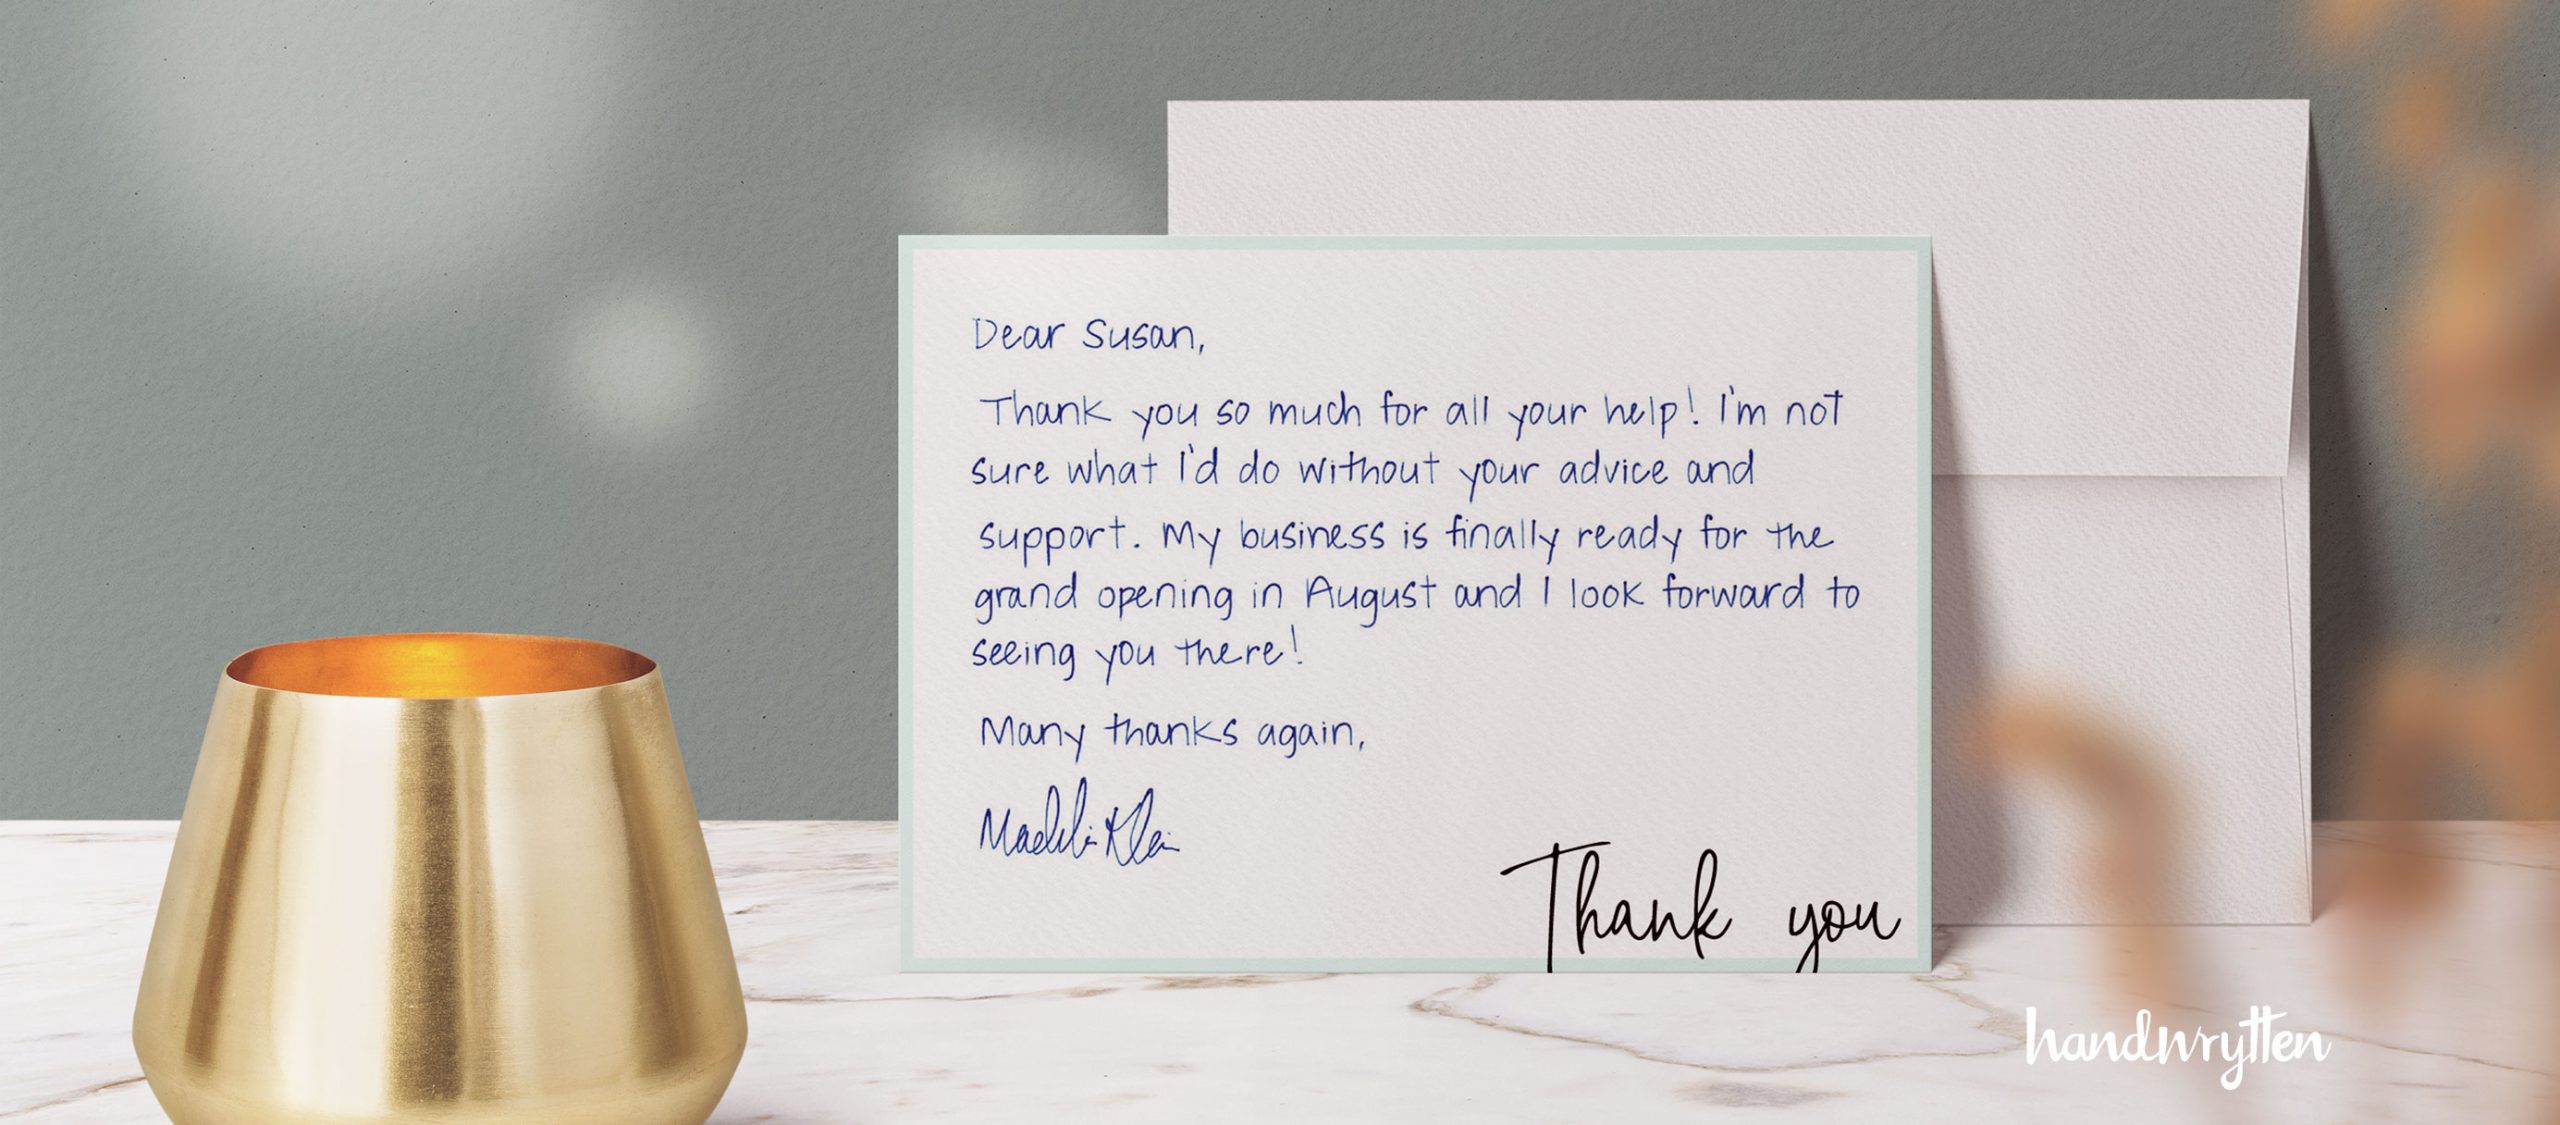 handwritten thank you note by merry Madeline